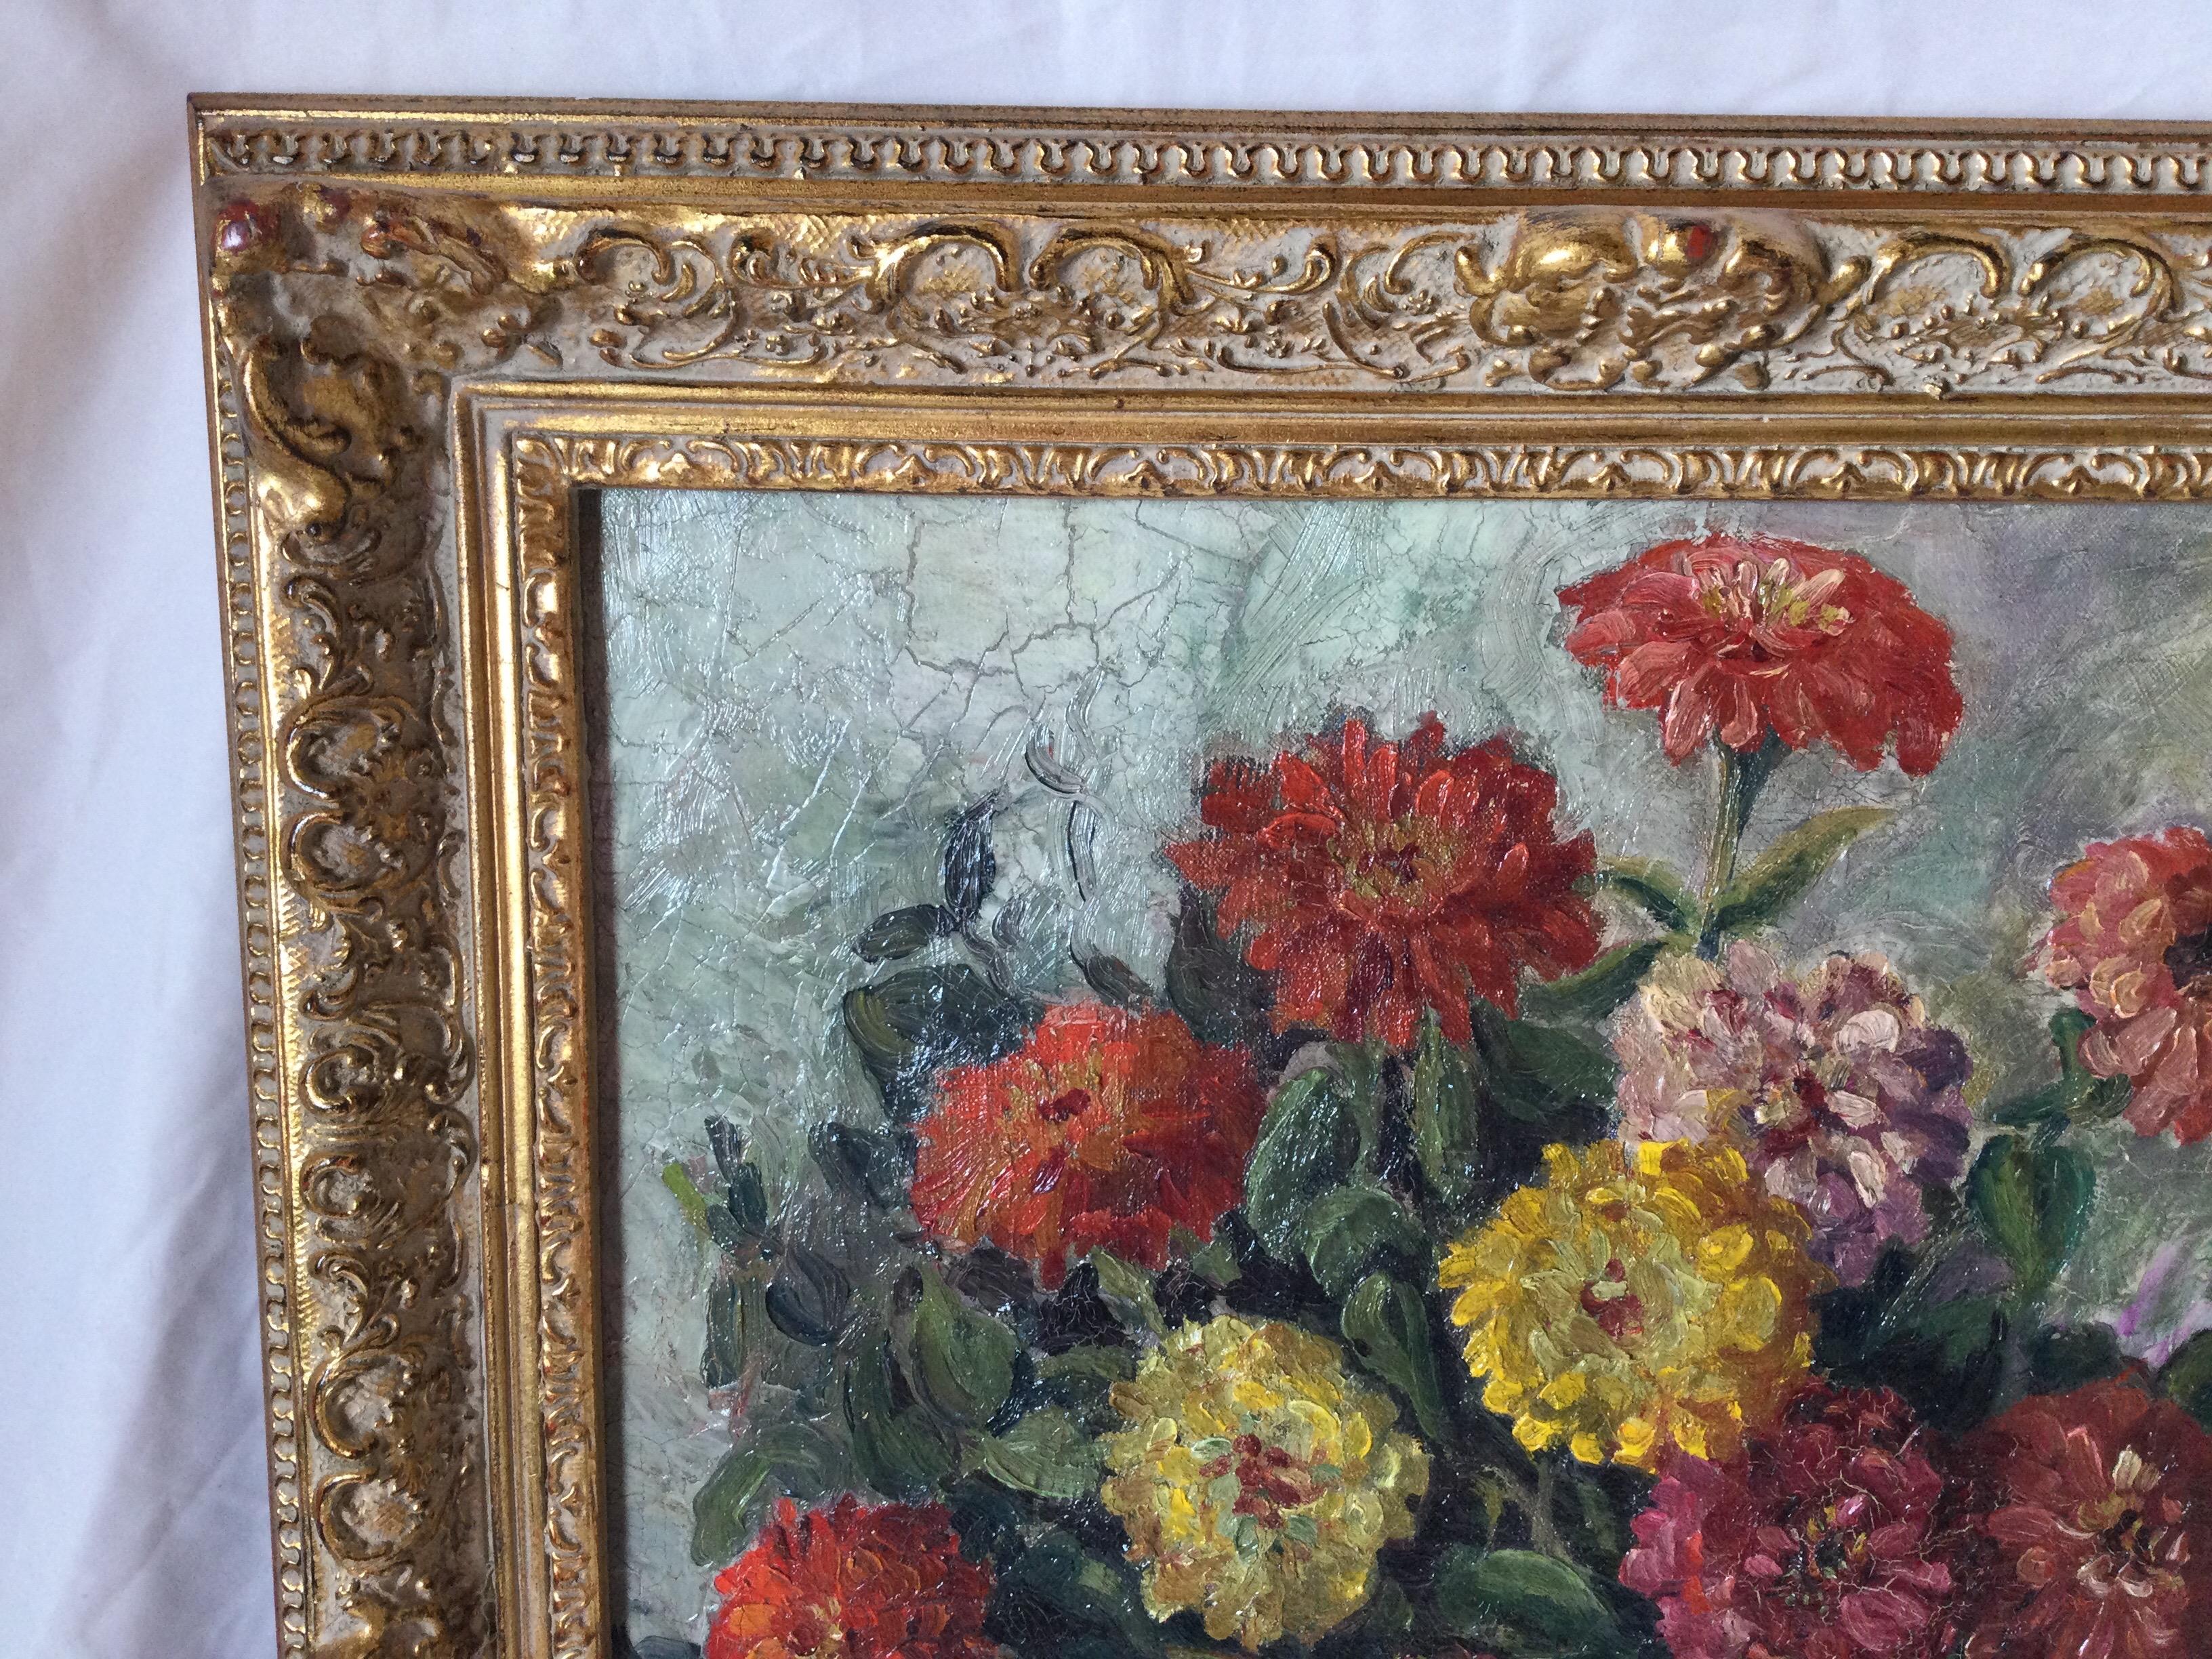 American Stunning Impressionist Painting of Zinnias in Giltwood Frame Oil on Canvas